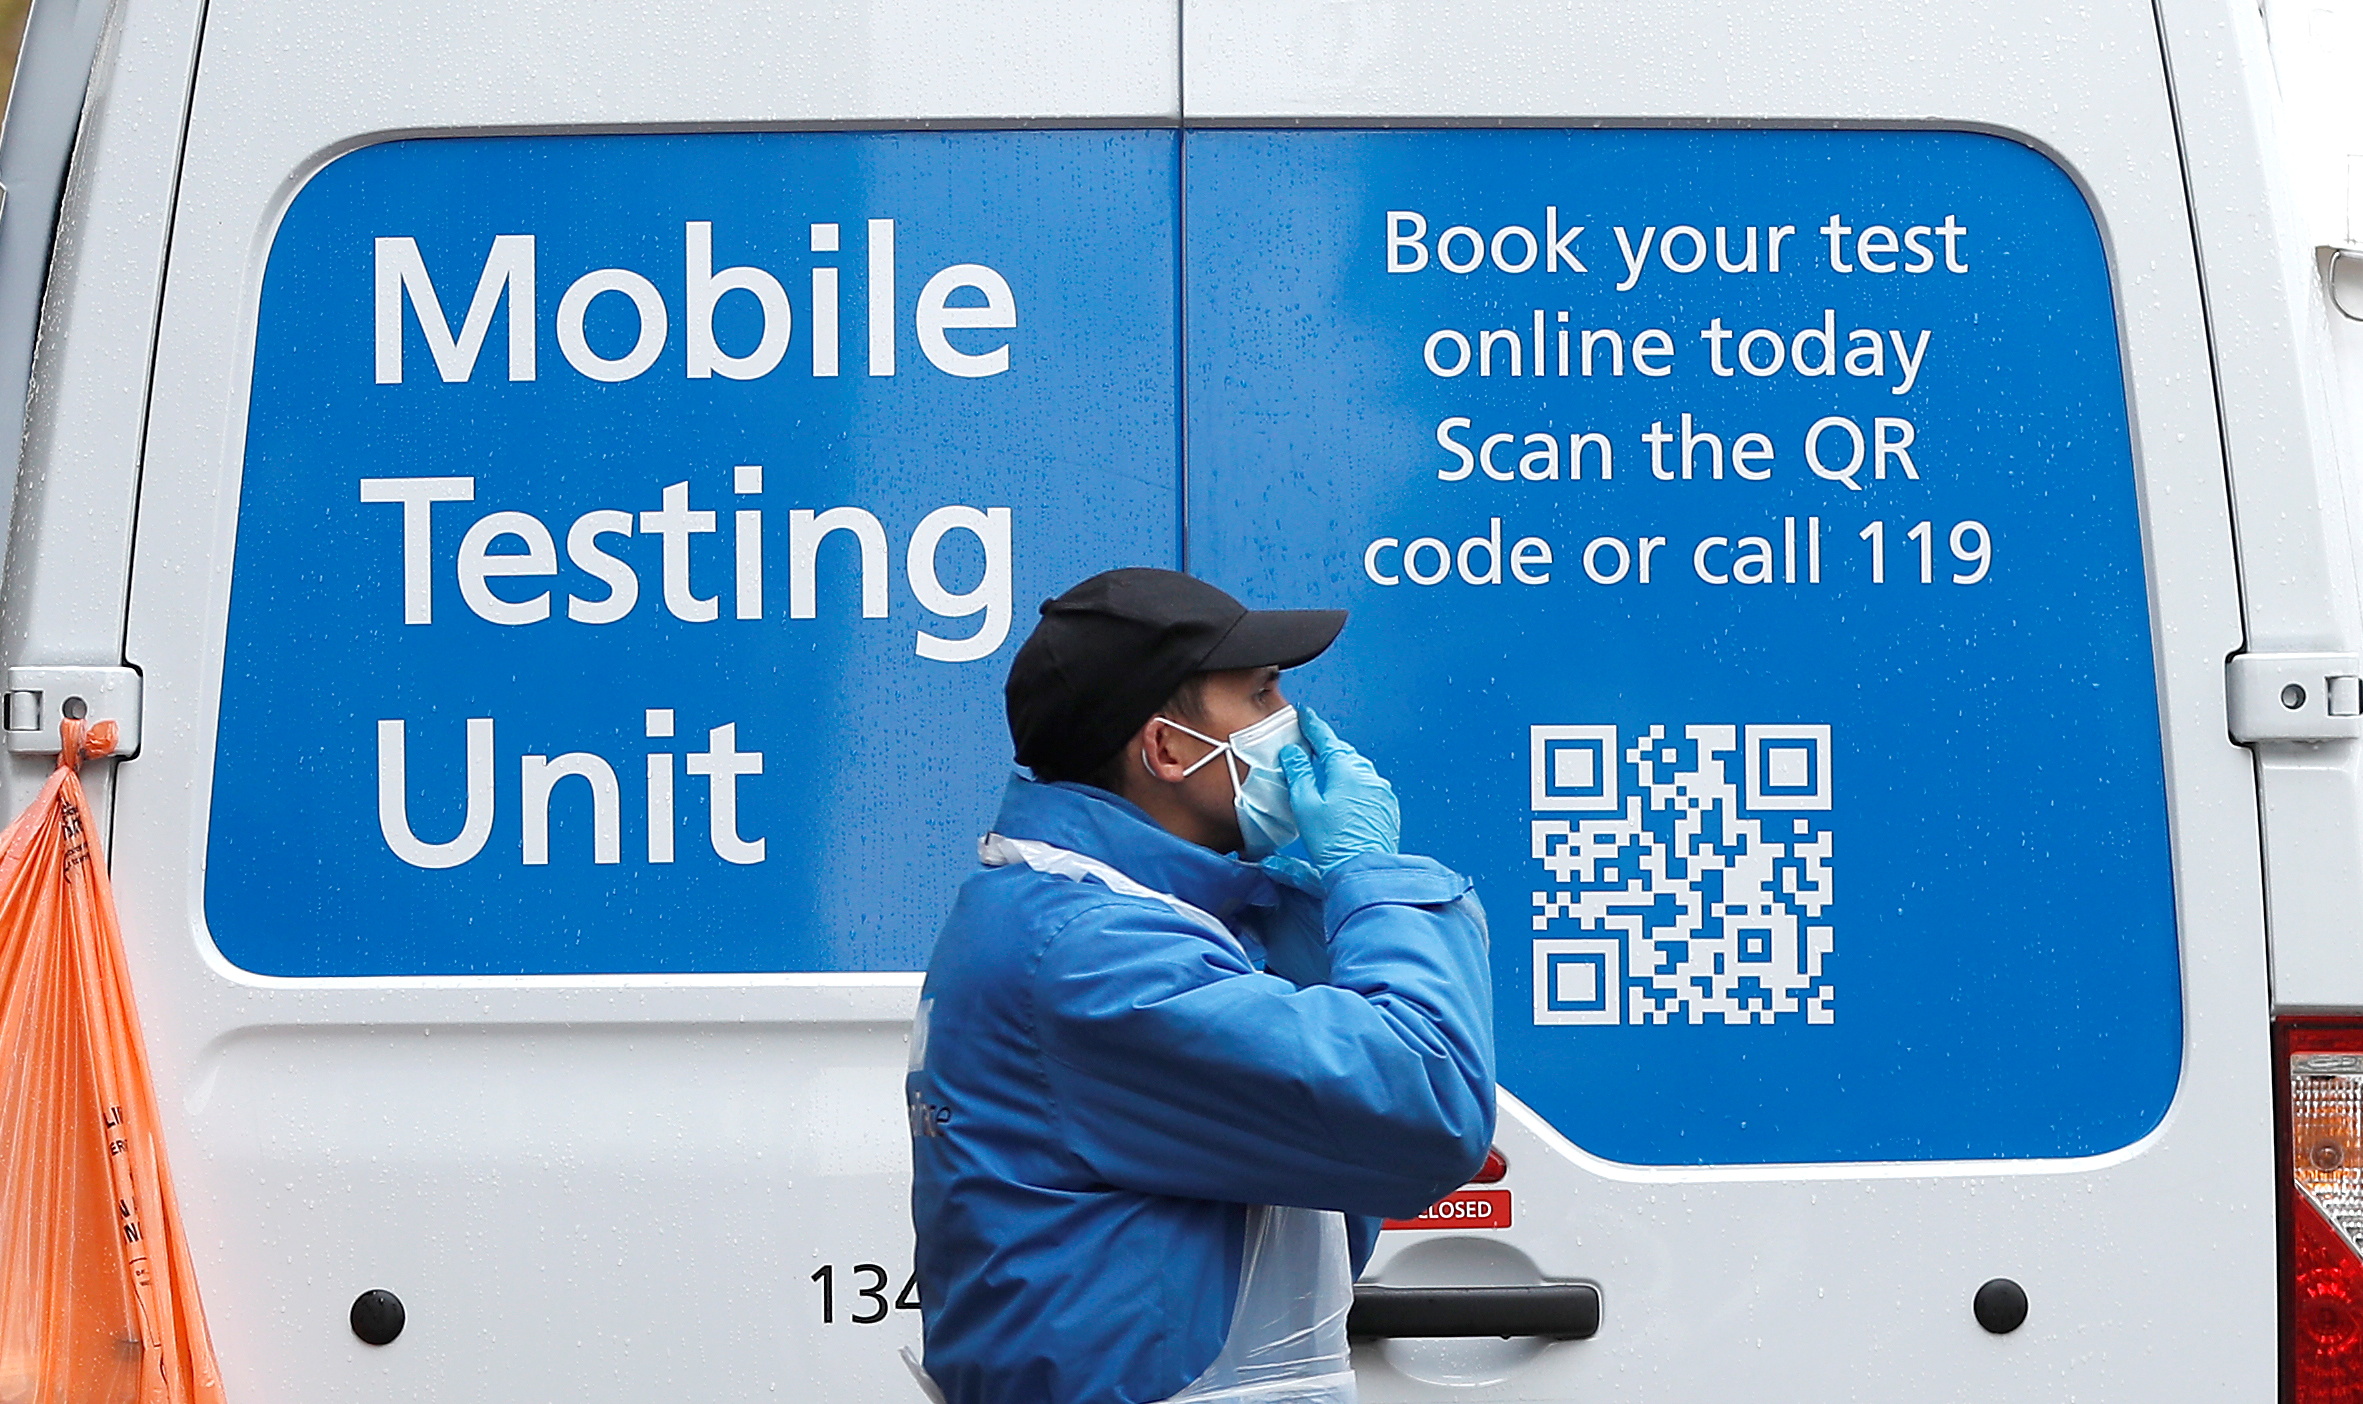 An NHS worker stands next to a coronavirus disease (COVID-19) mobile testing unit in Tower Hamlets, London